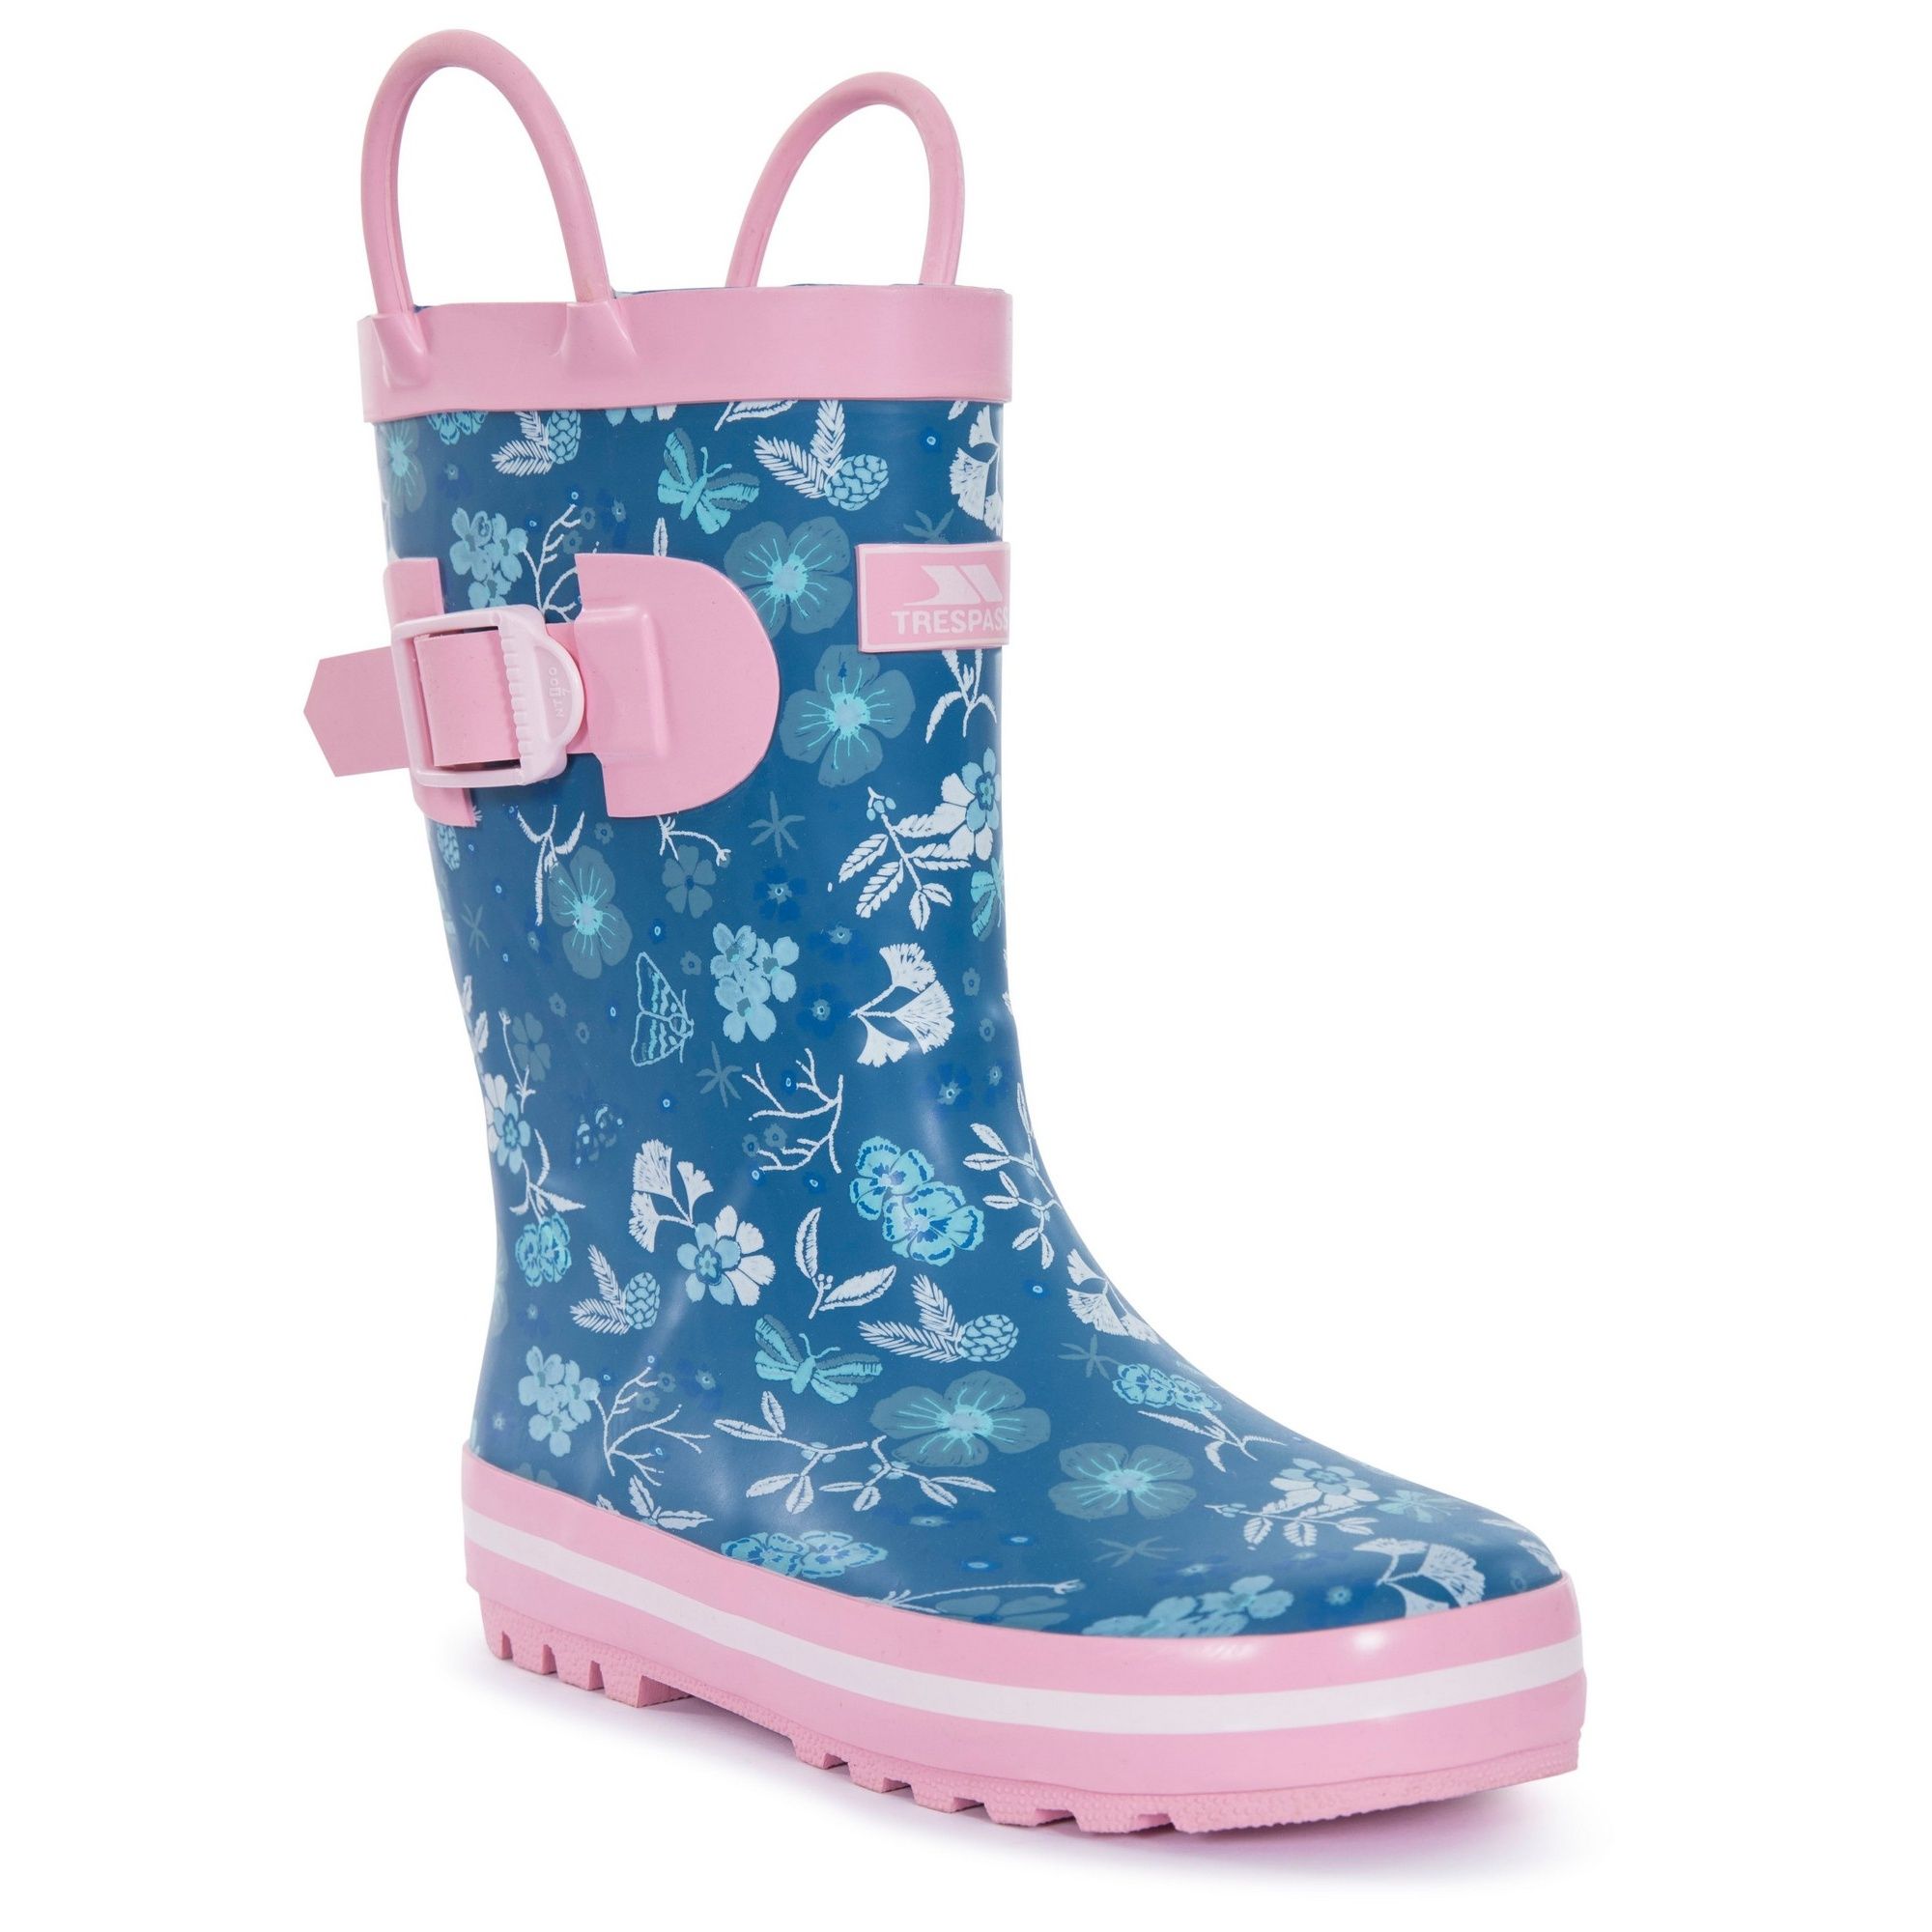 Printed welly boot. Adjustable buckle. Cushioned footbed. Durable grip sole. Waterproof. Upper: Rubber, Lining: Textile, Insole: EVA, Outsole: Rubber.